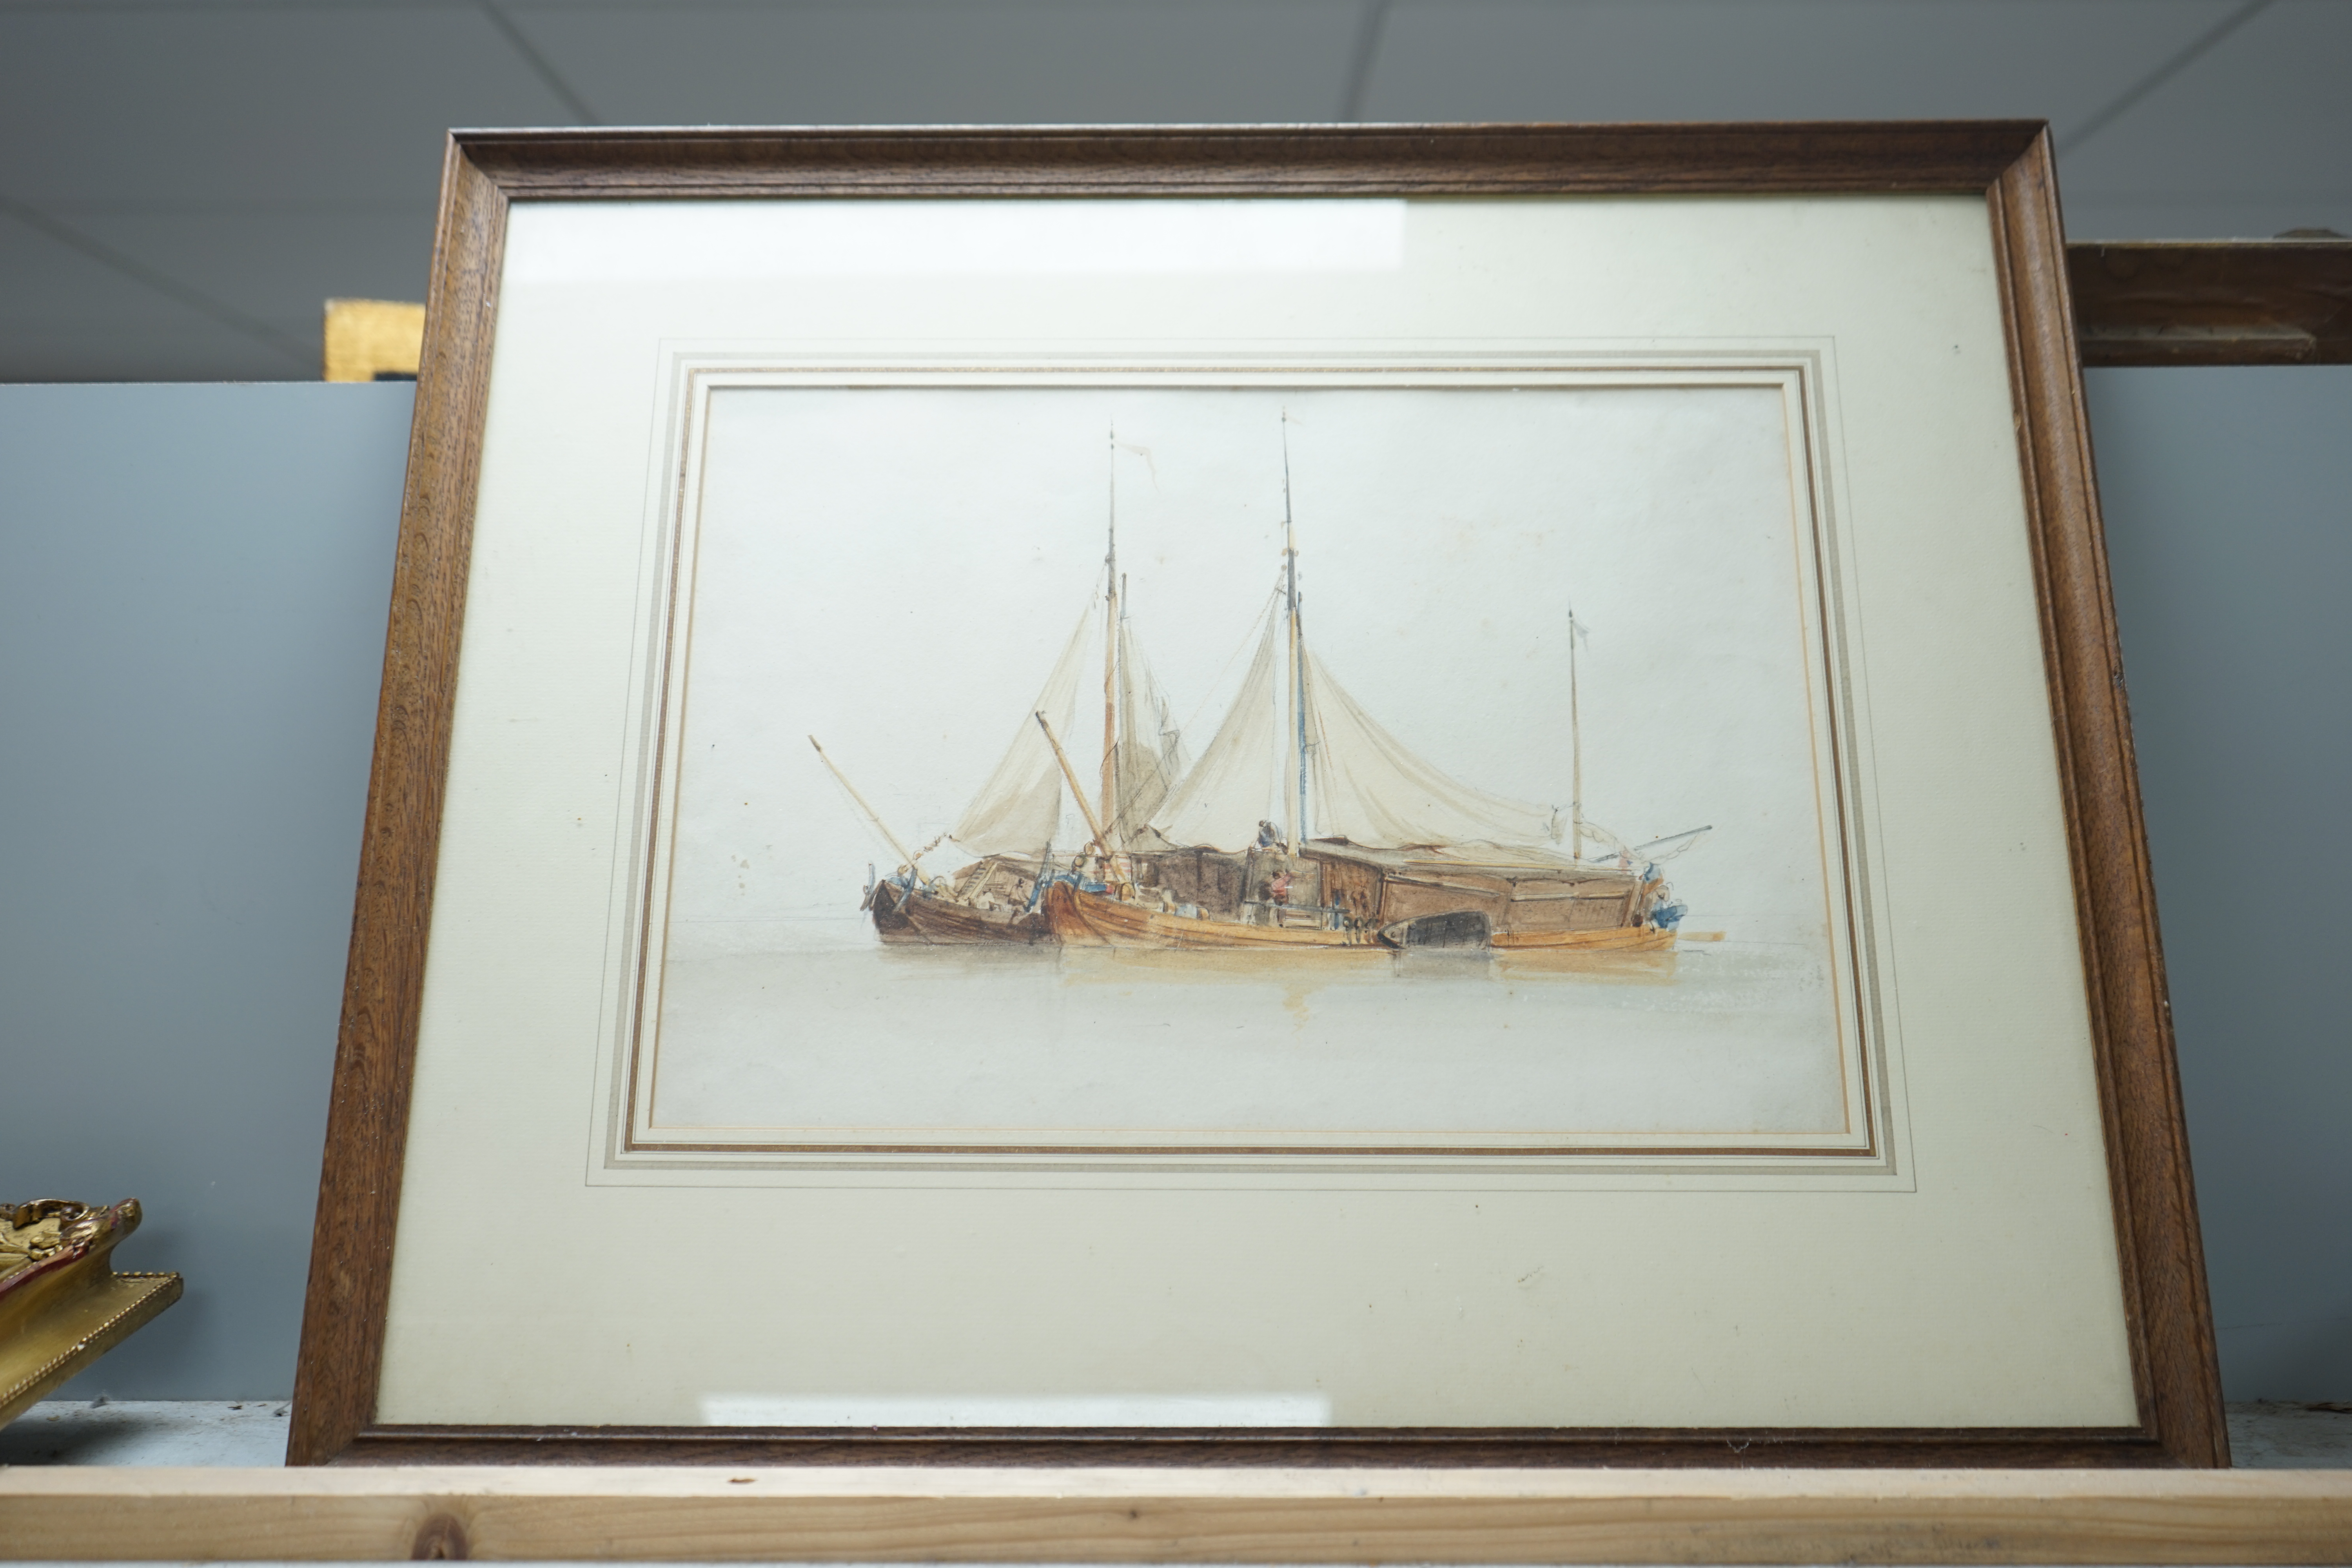 Alfred Vickers (1810-1837), watercolour, ‘Shipping in a calm’, unsigned, inscribed label verso, 25 x 34cm. Condition - fair